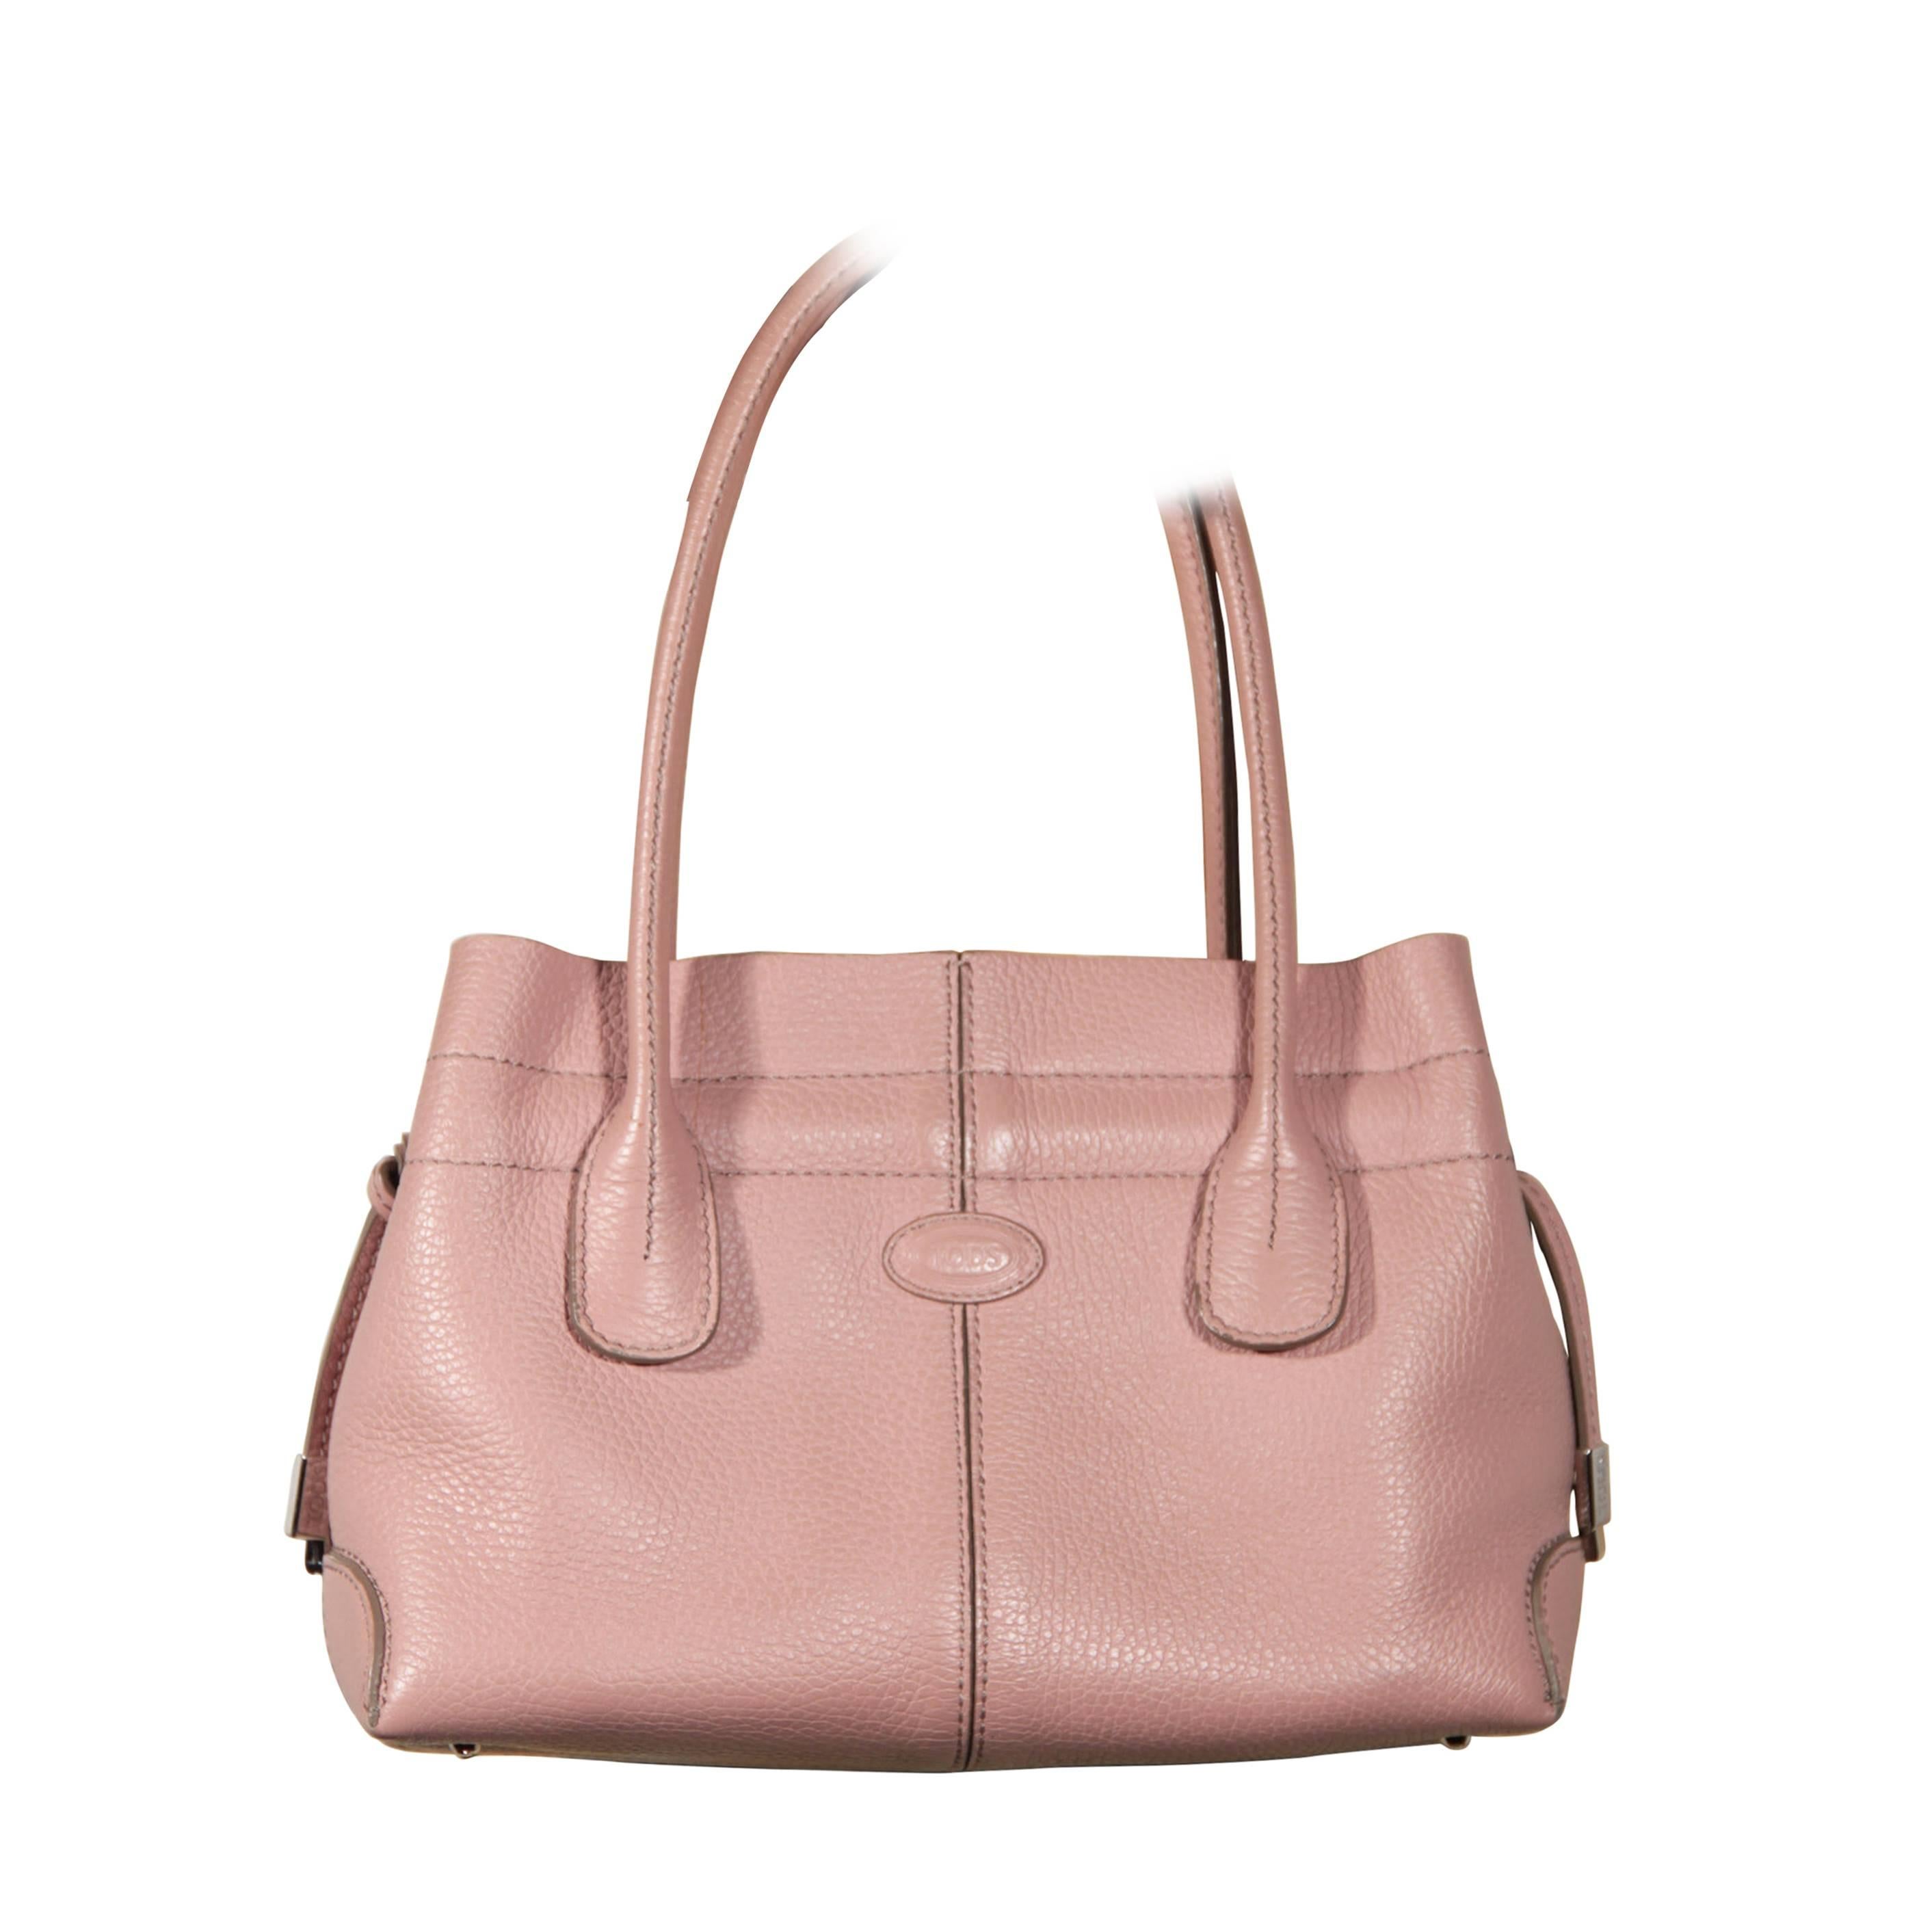 TOD'S Italian Pink Pebbled Leather Small NEW D BAG Handtasche TOTE Umhängetasche